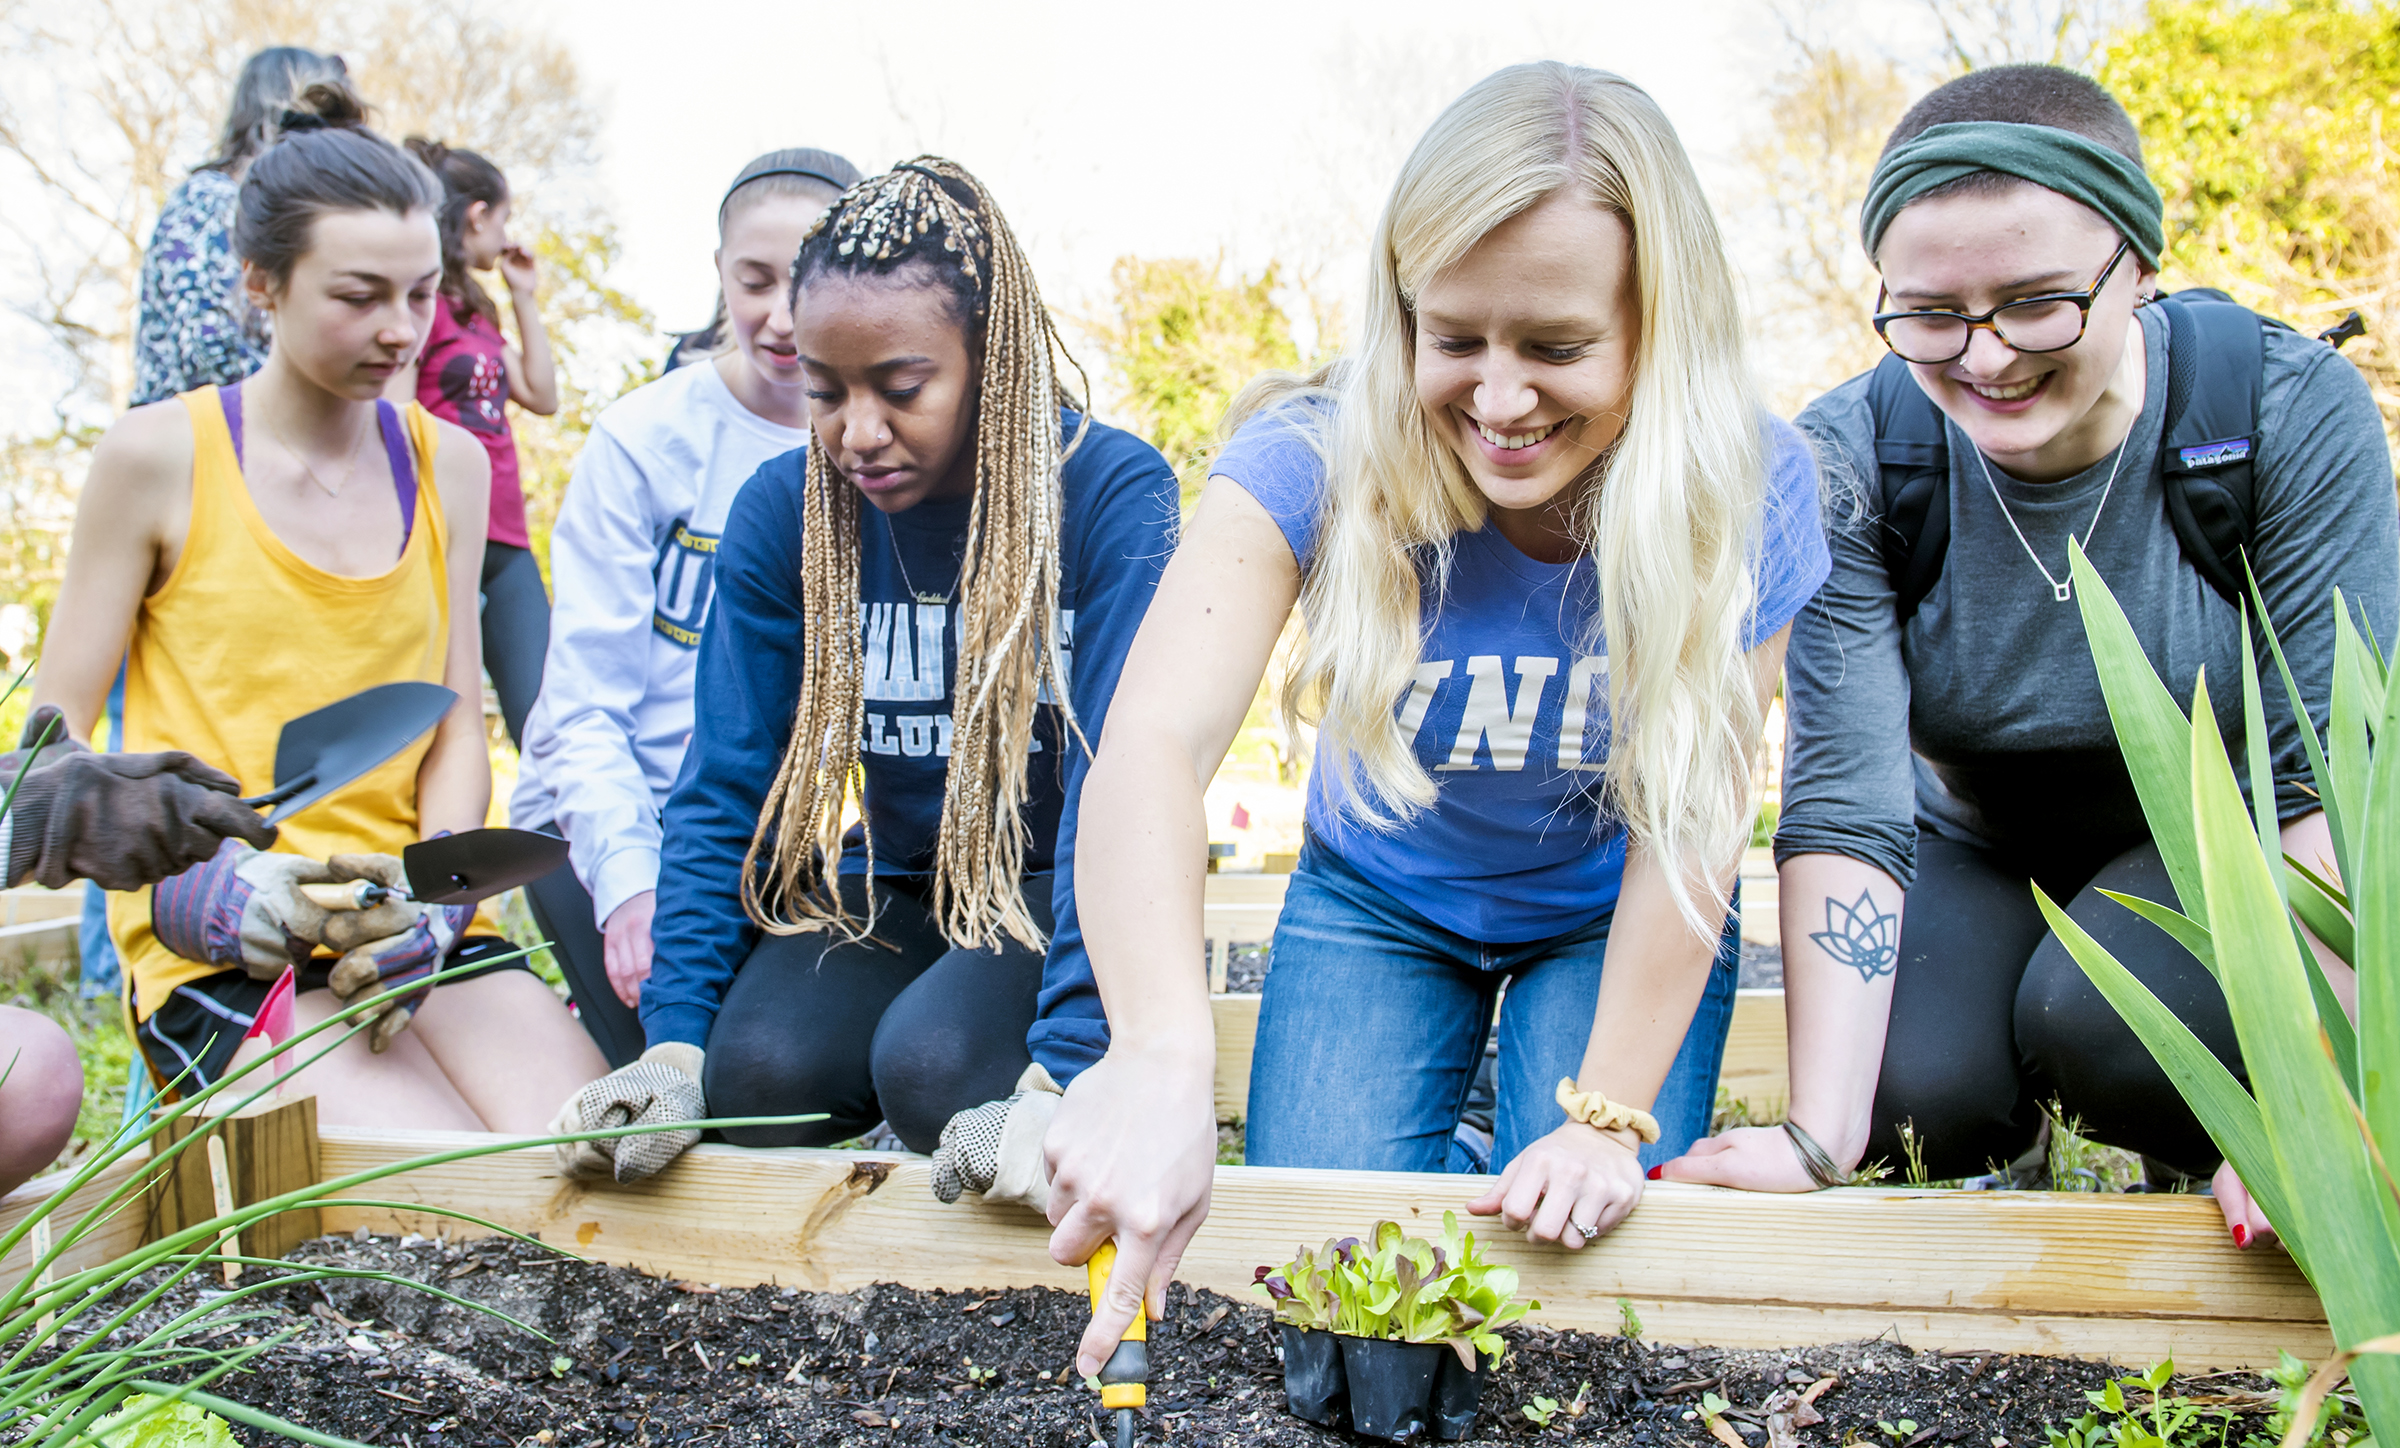 A smiling UNCG student digs in a garden bed as other students look on.